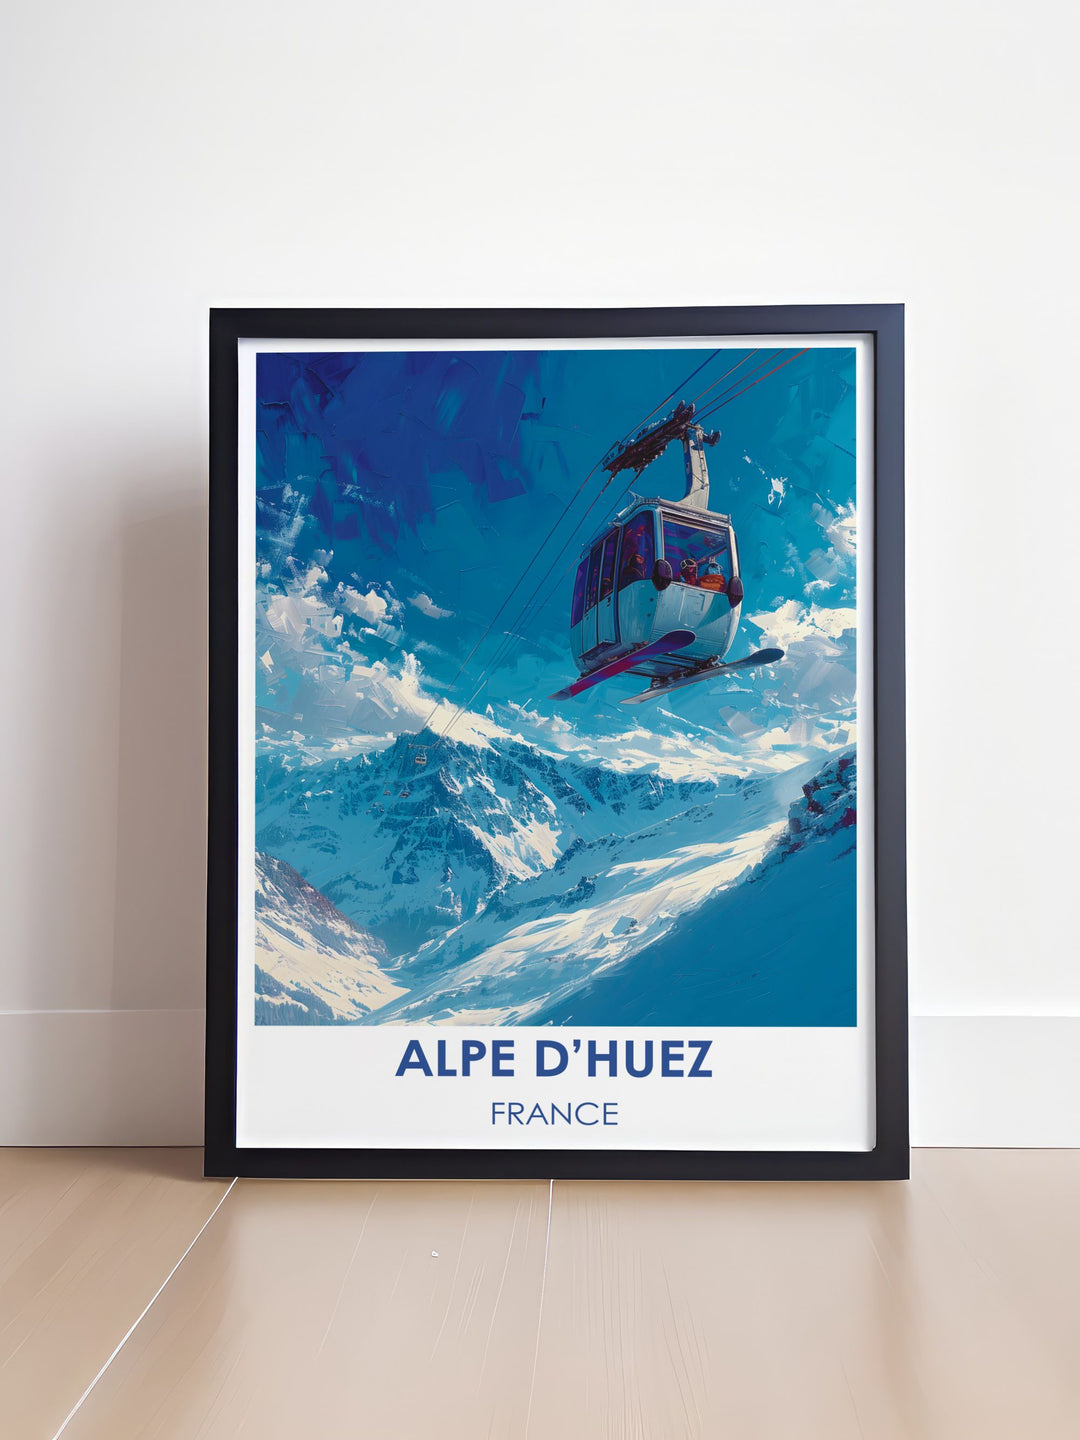 Wall art capturing the ascent of Téléphérique de Pic Blanc, showcasing the cable car journey amidst the stunning French Alps.